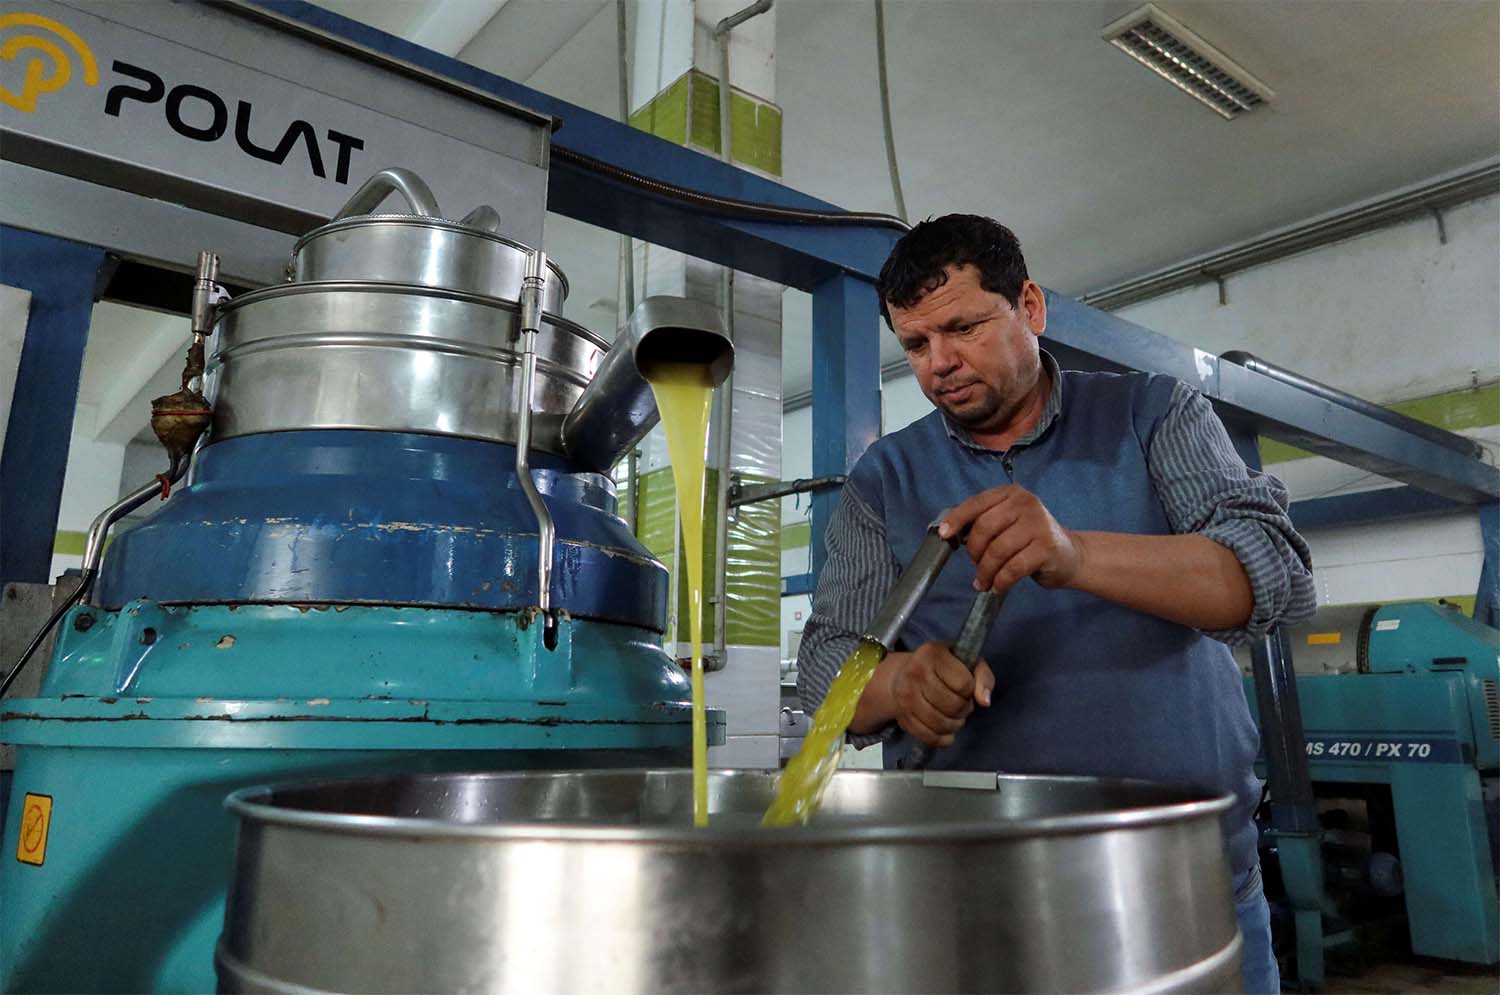 Tunisian olive oil producer, Mustapha Mtiraoui, works inside his oil mill in Kairouan